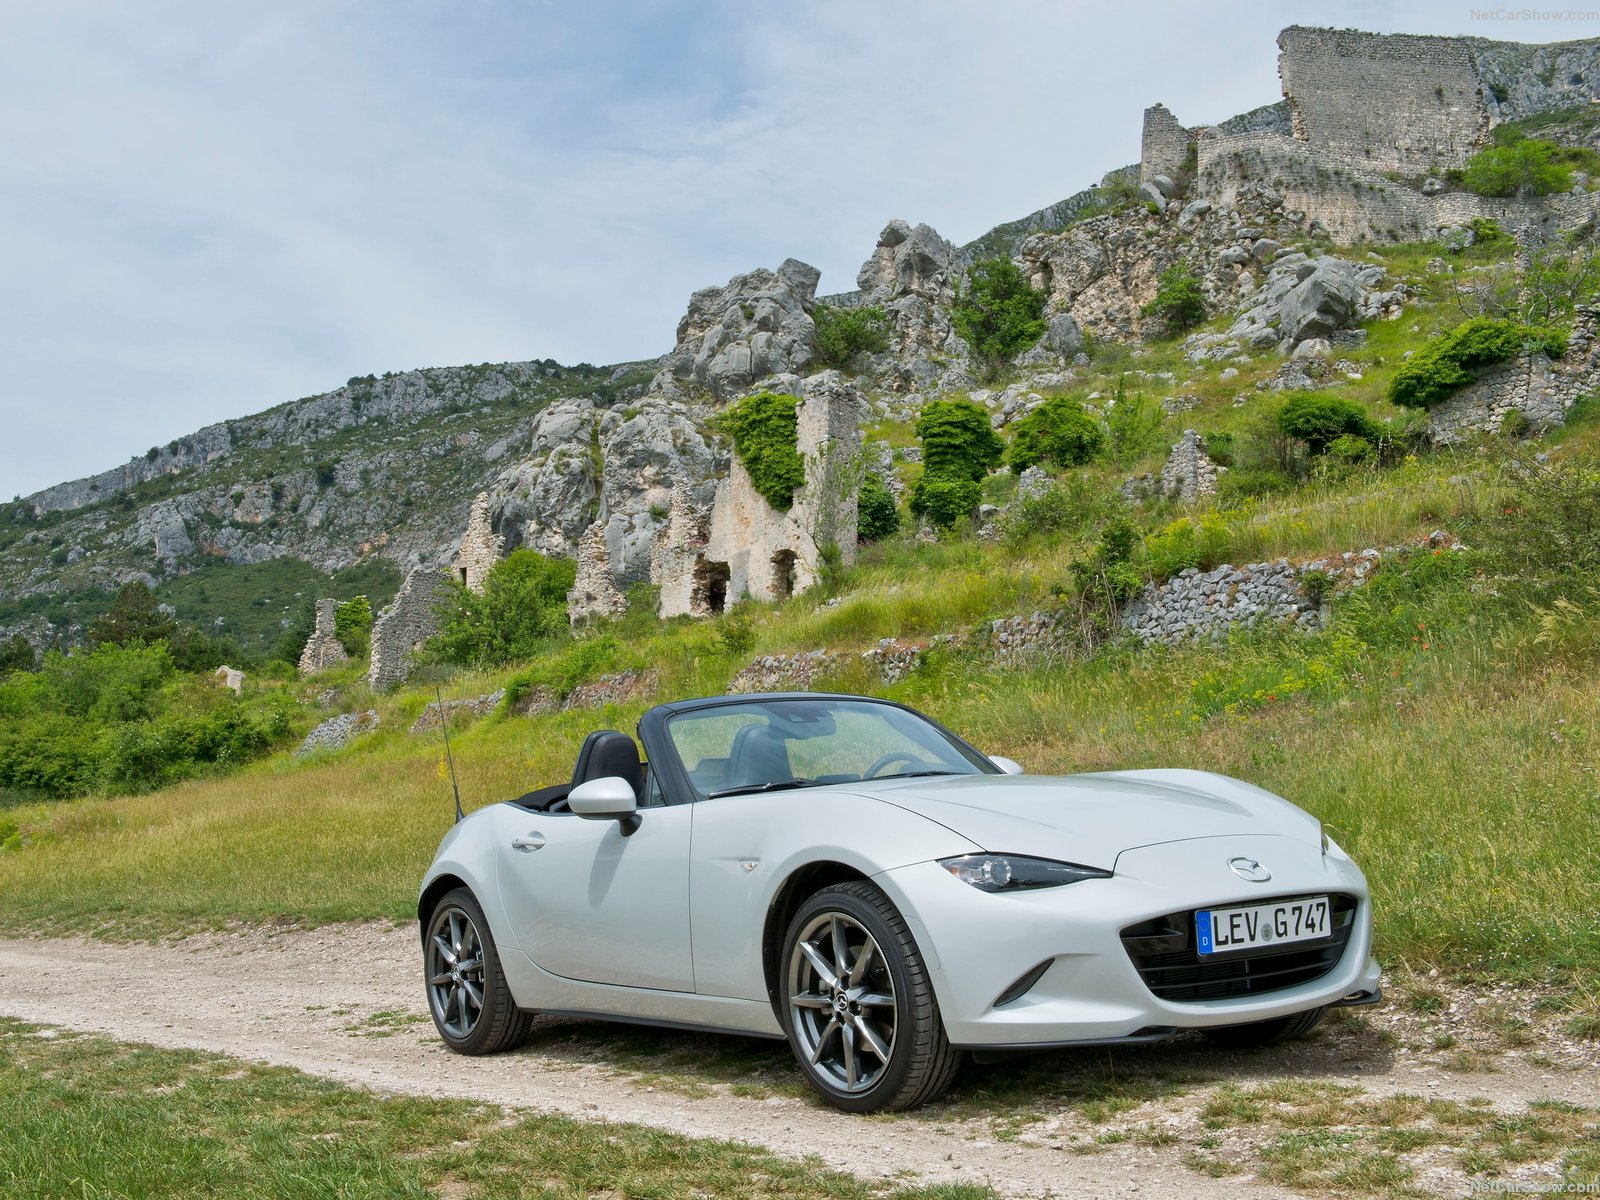 Mazda Mx 5 Picture 144142 Mazda Photo Gallery Carsbase Com Images, Photos, Reviews